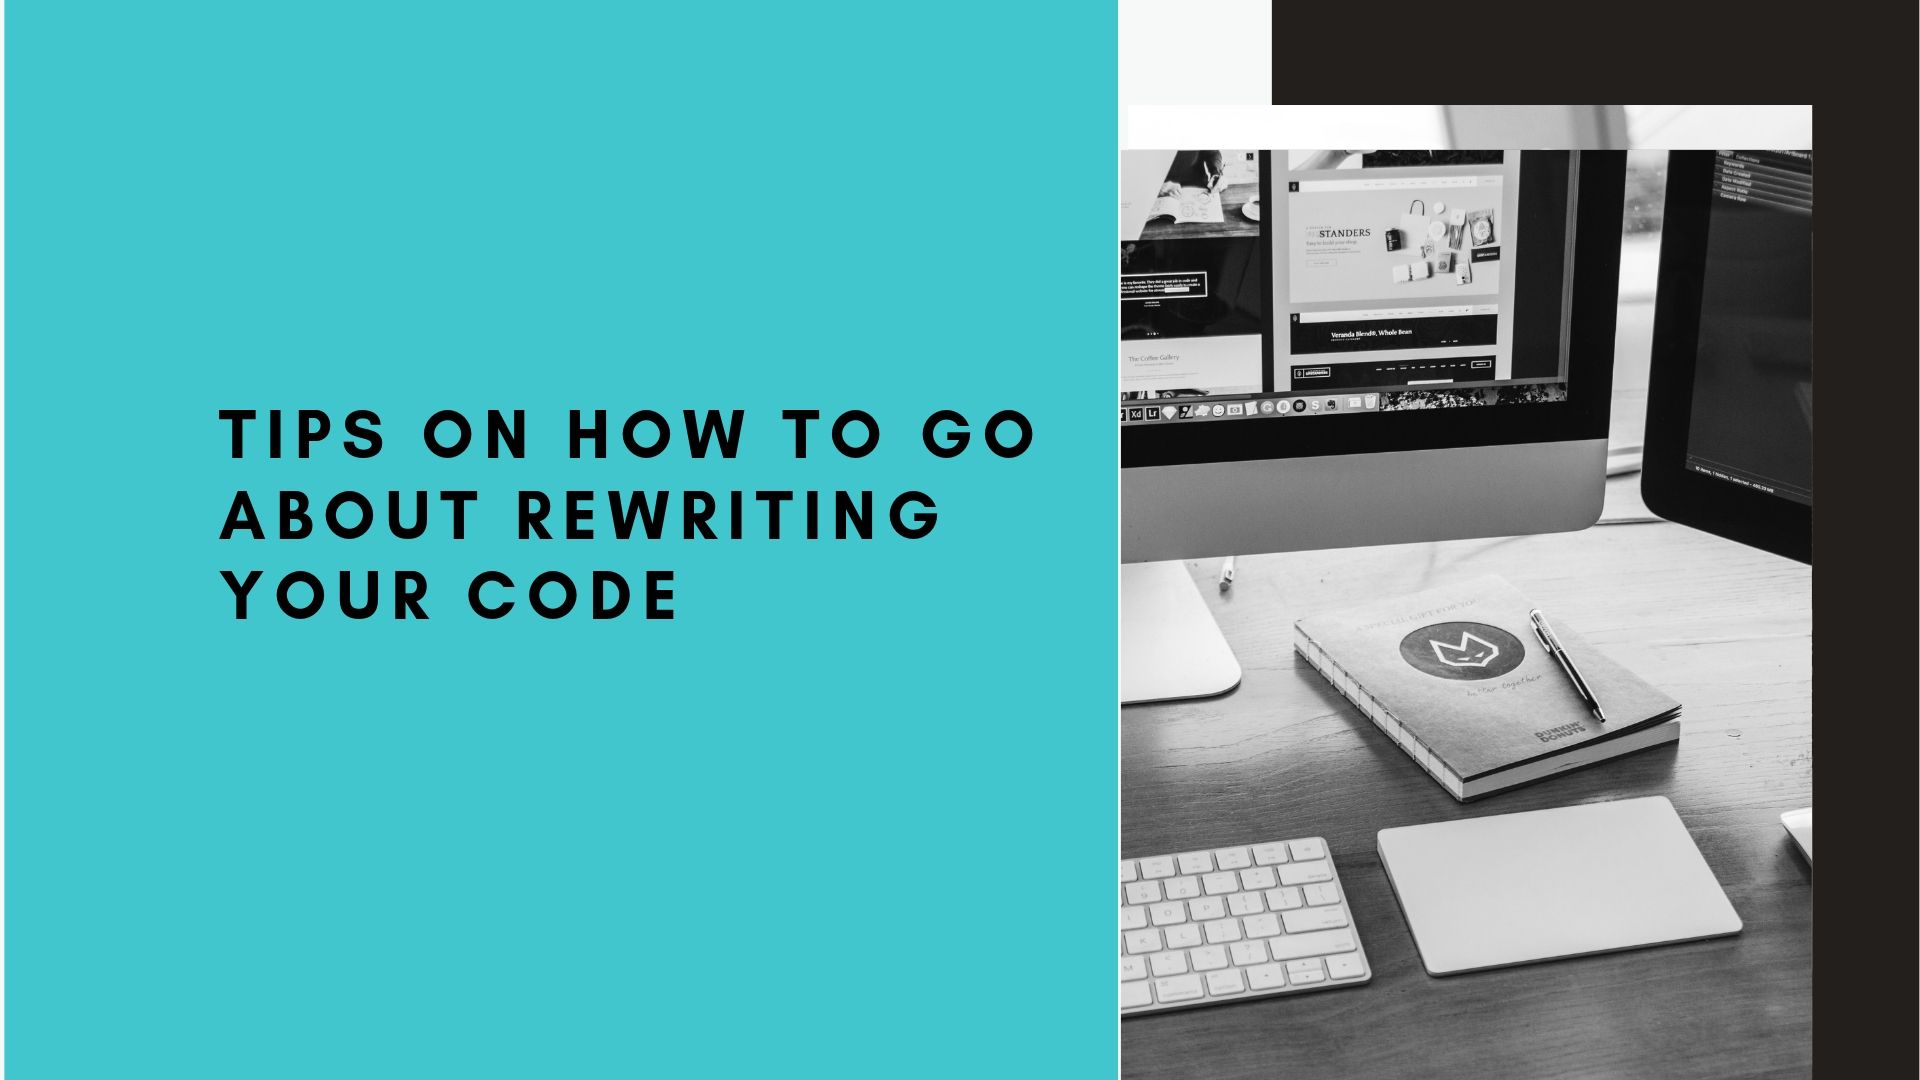 Tips On How To Go About Rewriting Your Code